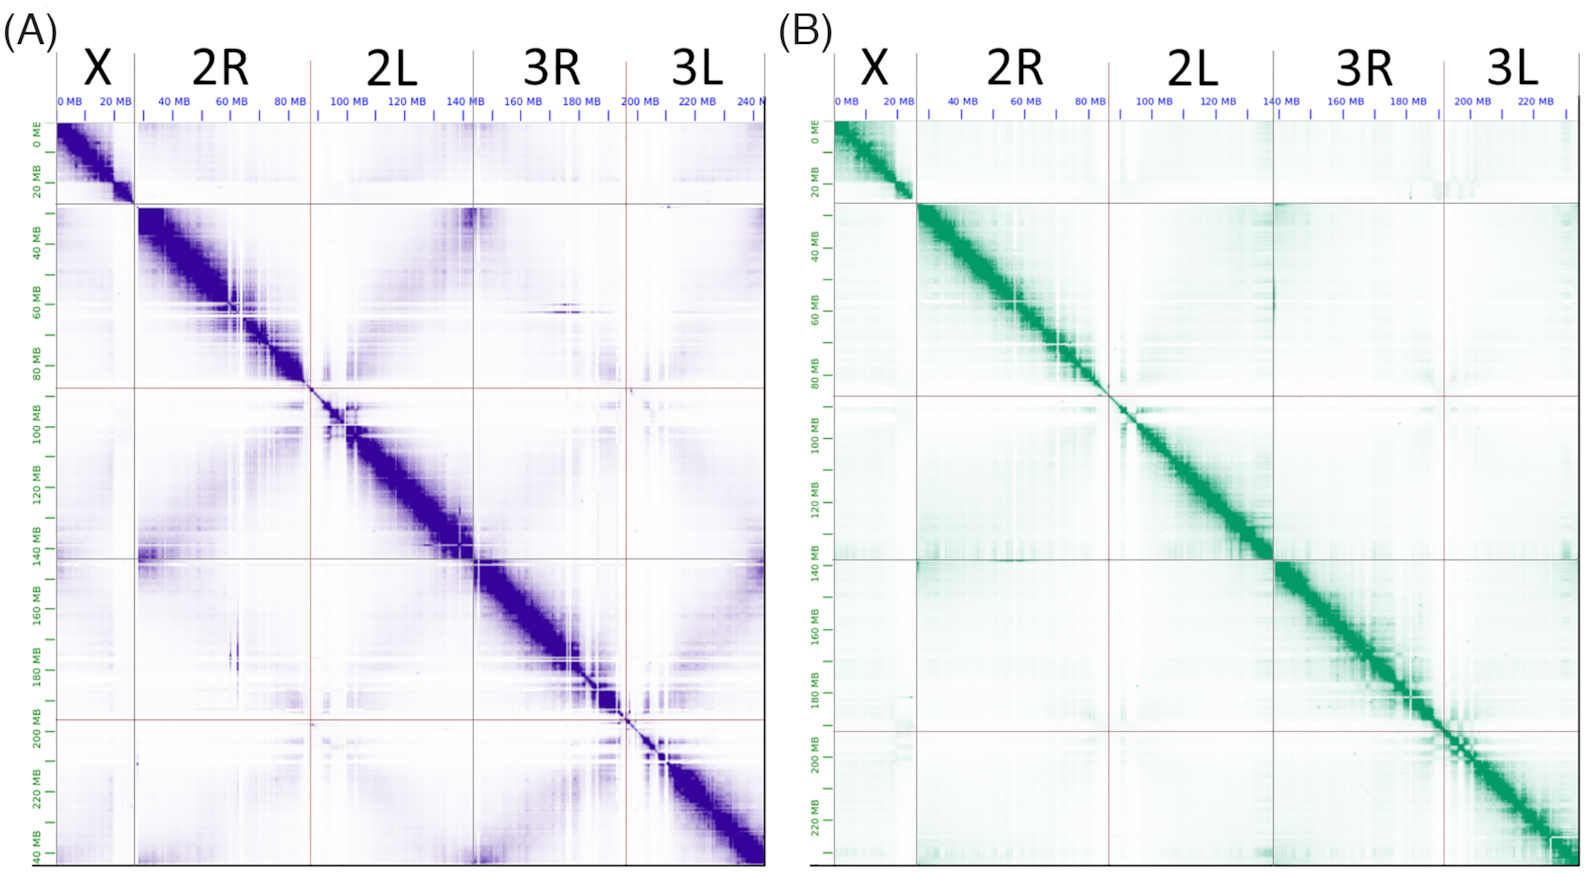 The Hi-C contact heat maps obtained after manual correction of genome assemblies. A, A. coluzzii AcolMOP1. B, A. arabiensis AaraD3. From left to right in each heat map, chromosome X, chromosome 2 (2R+2L),  chromosome 3 (3R+3L). The heat maps were produced by JBAT.